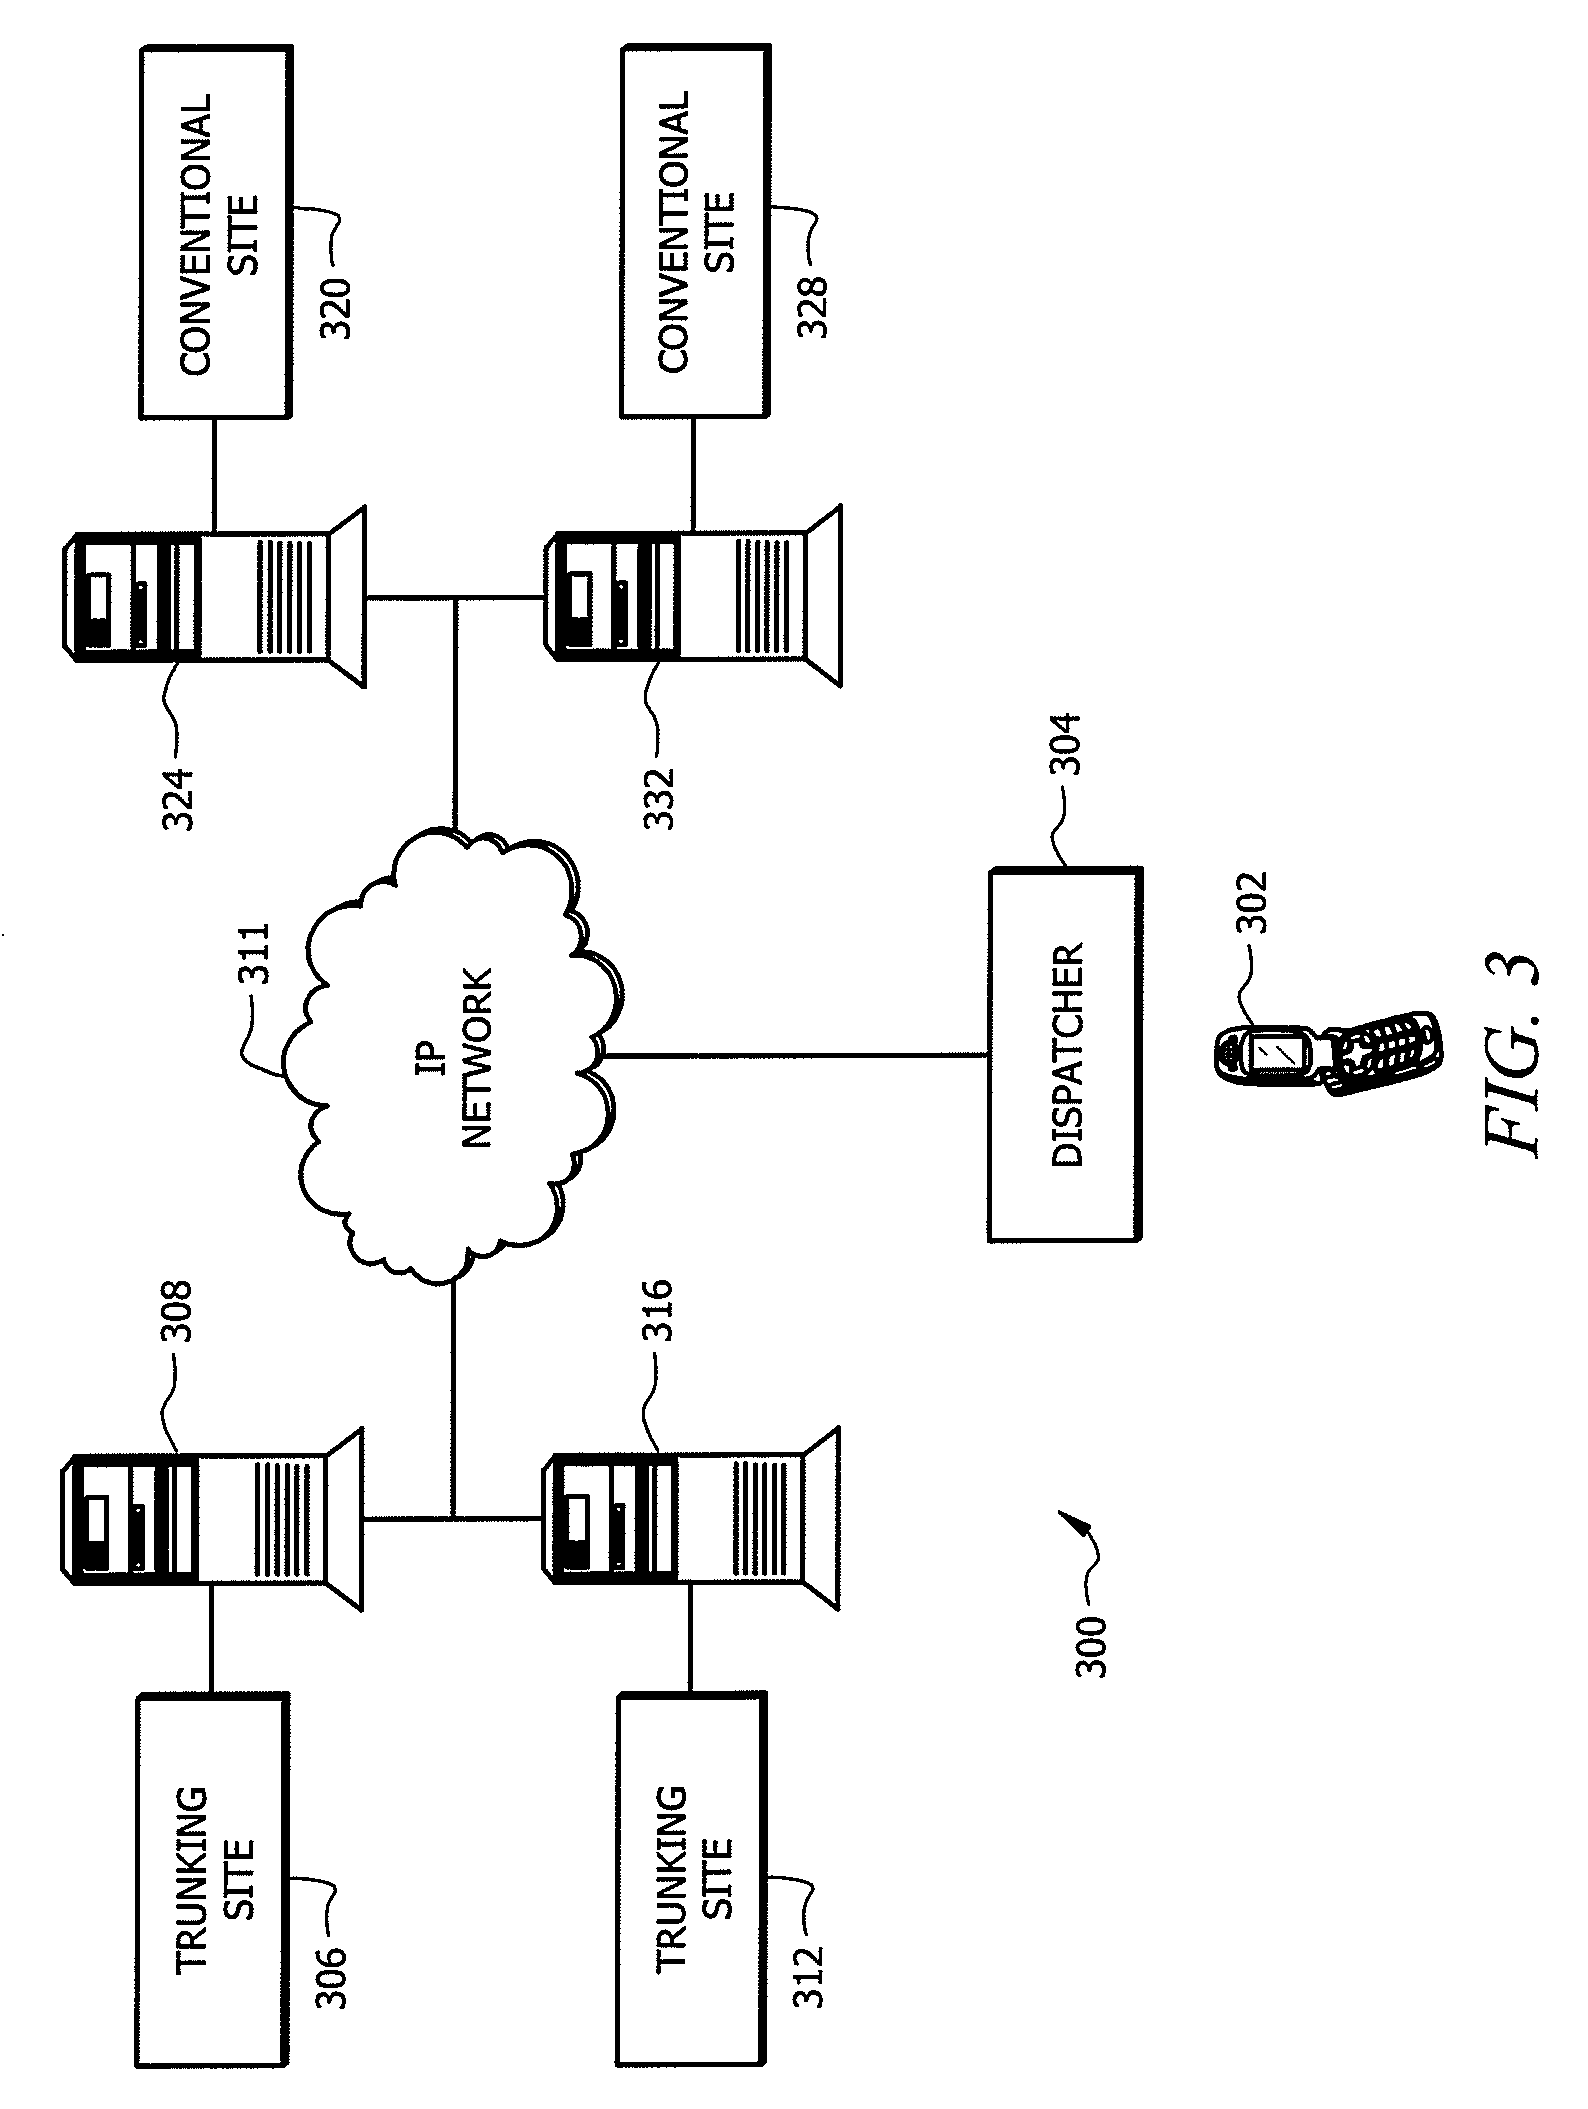 Method and system for integration of trunking and conventional land mobile radio systems